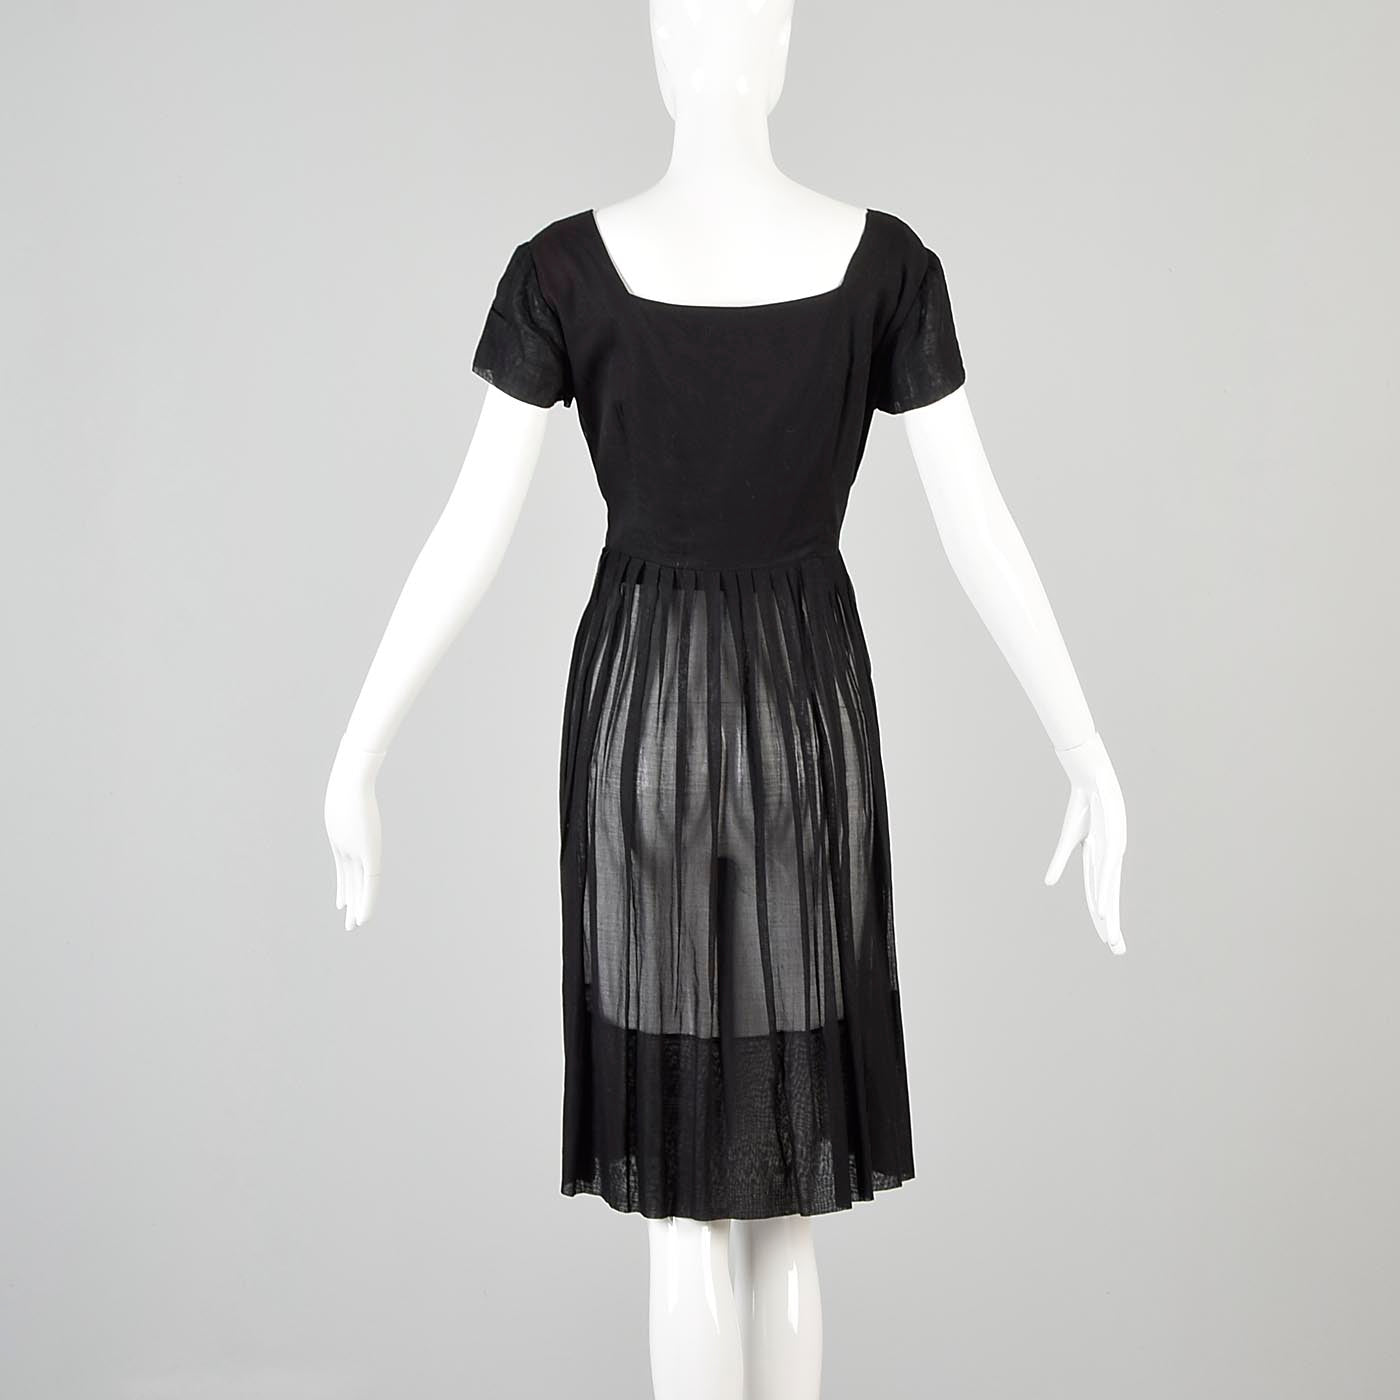 1950s Sheer Black Dress with Mother of Pearl Buttons